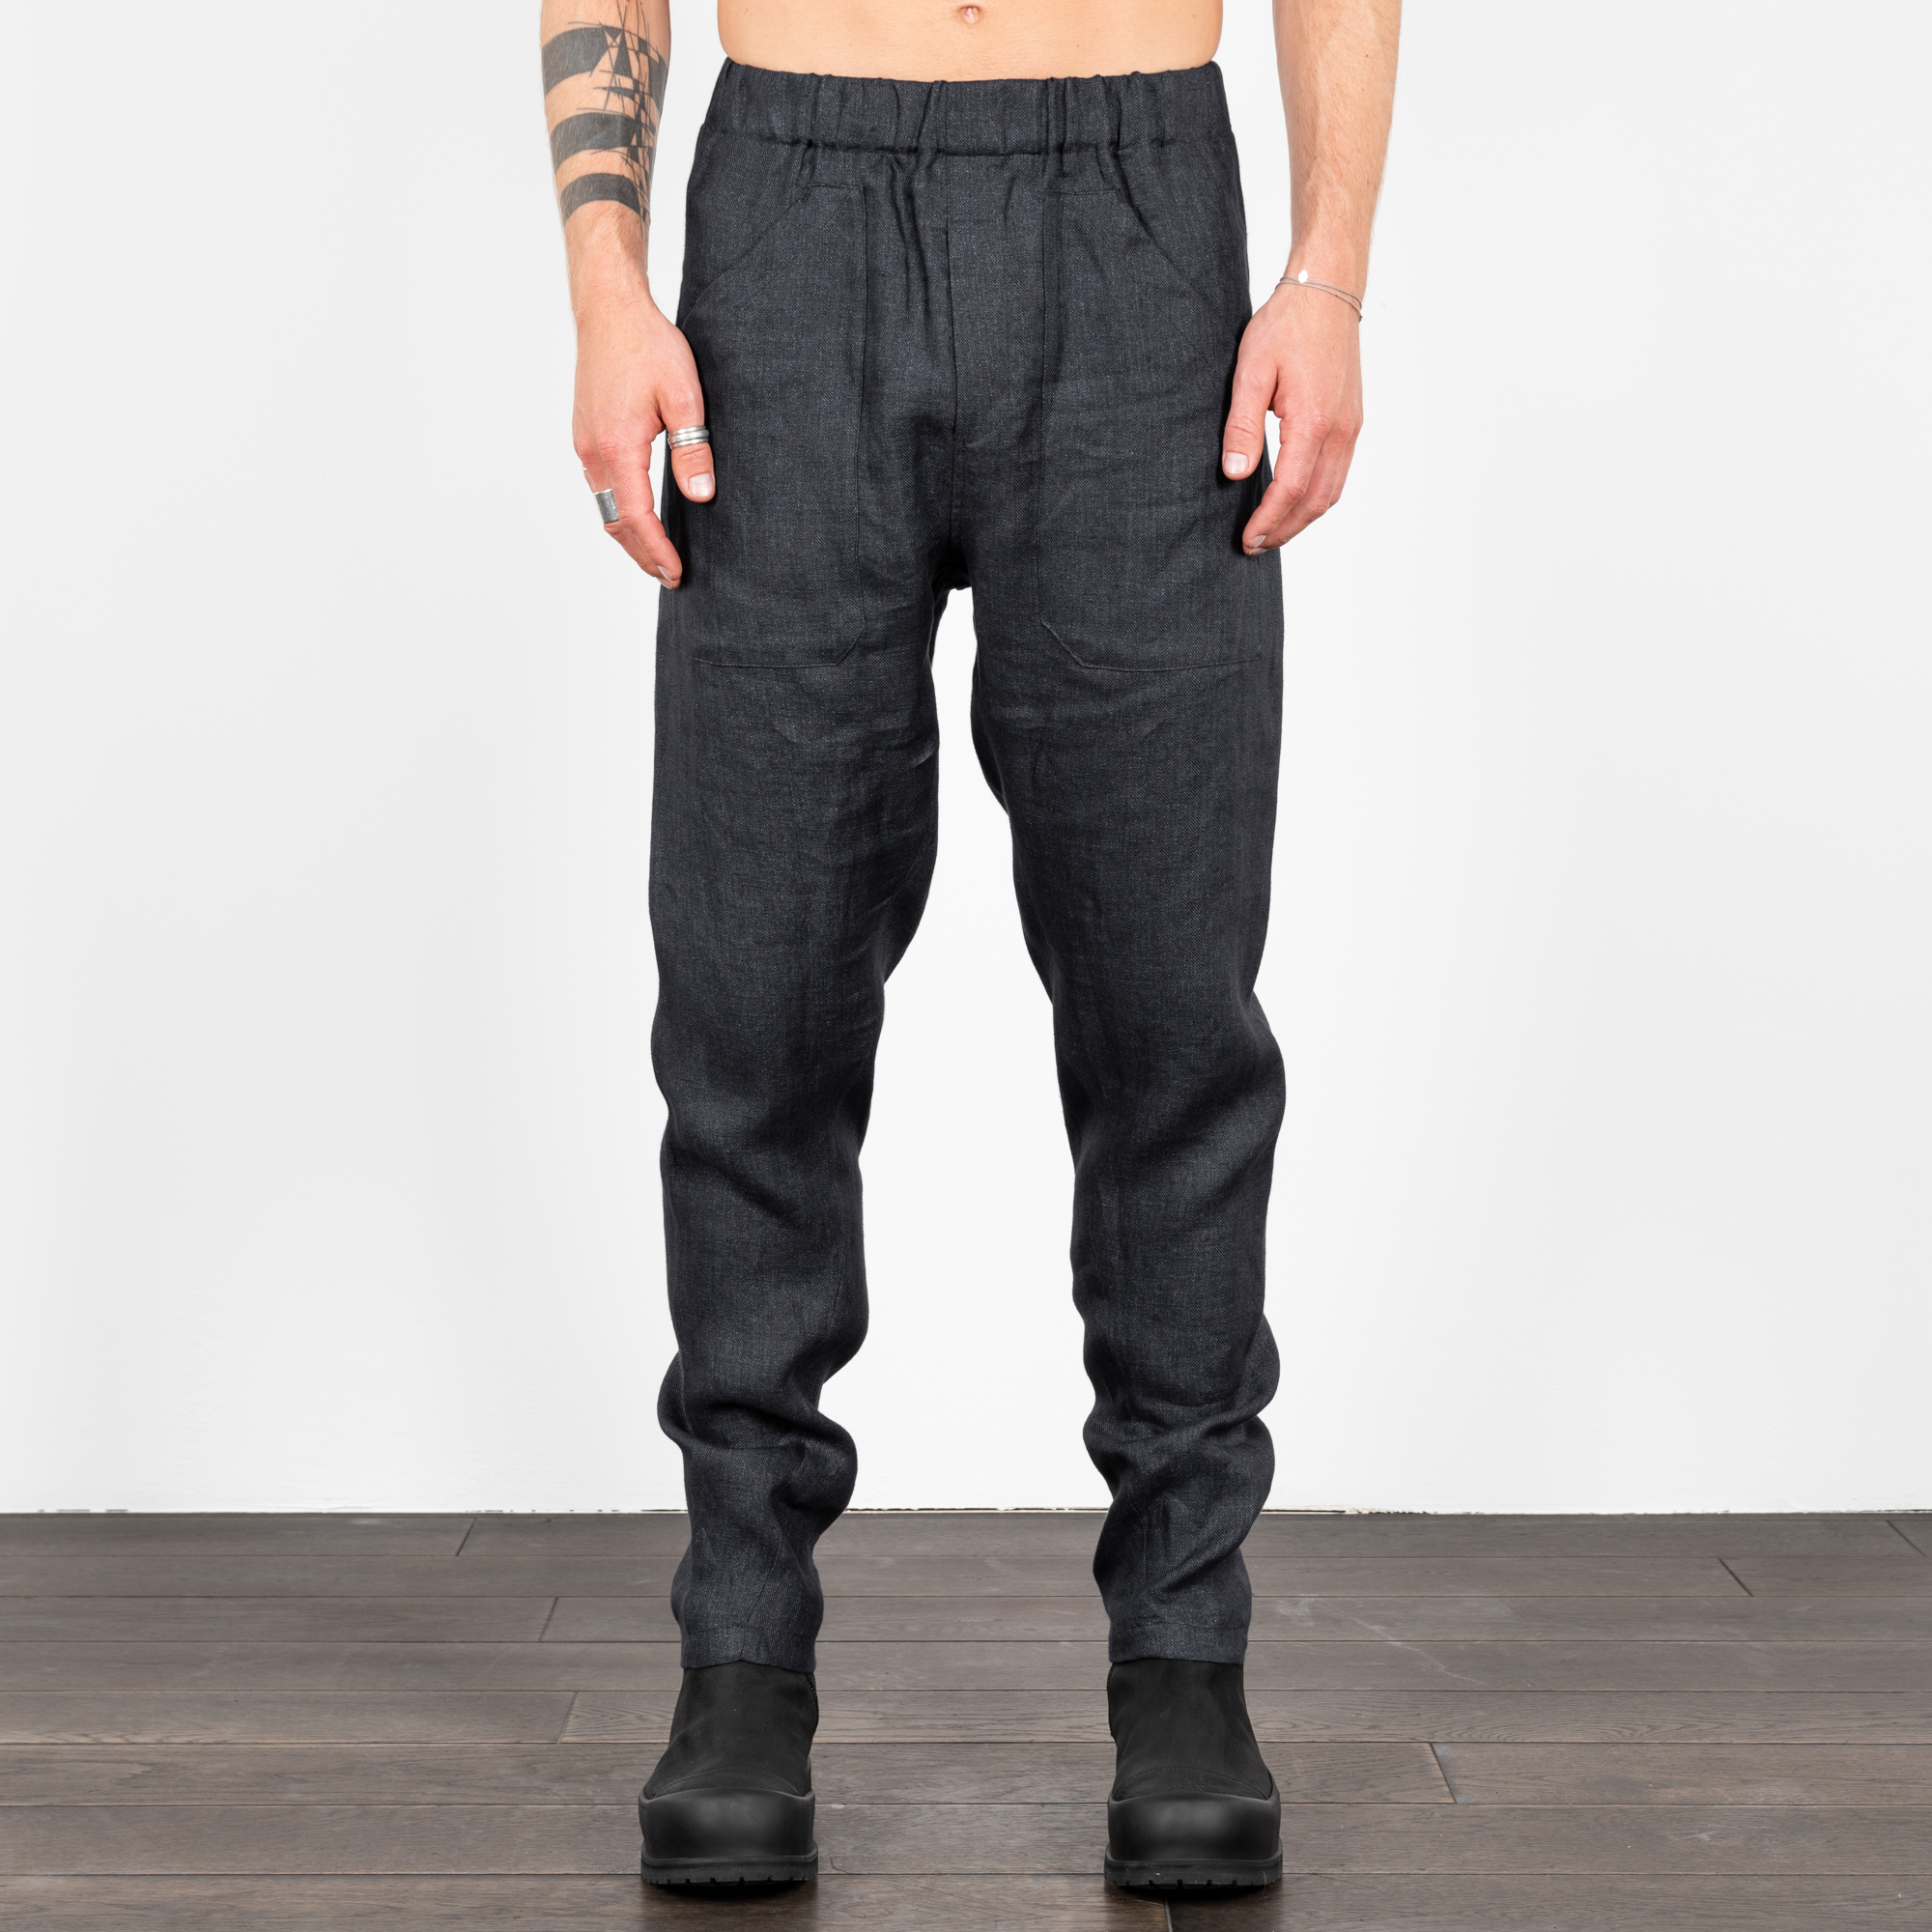 SHINY NAVY BAGGY PANTS|wolfensson